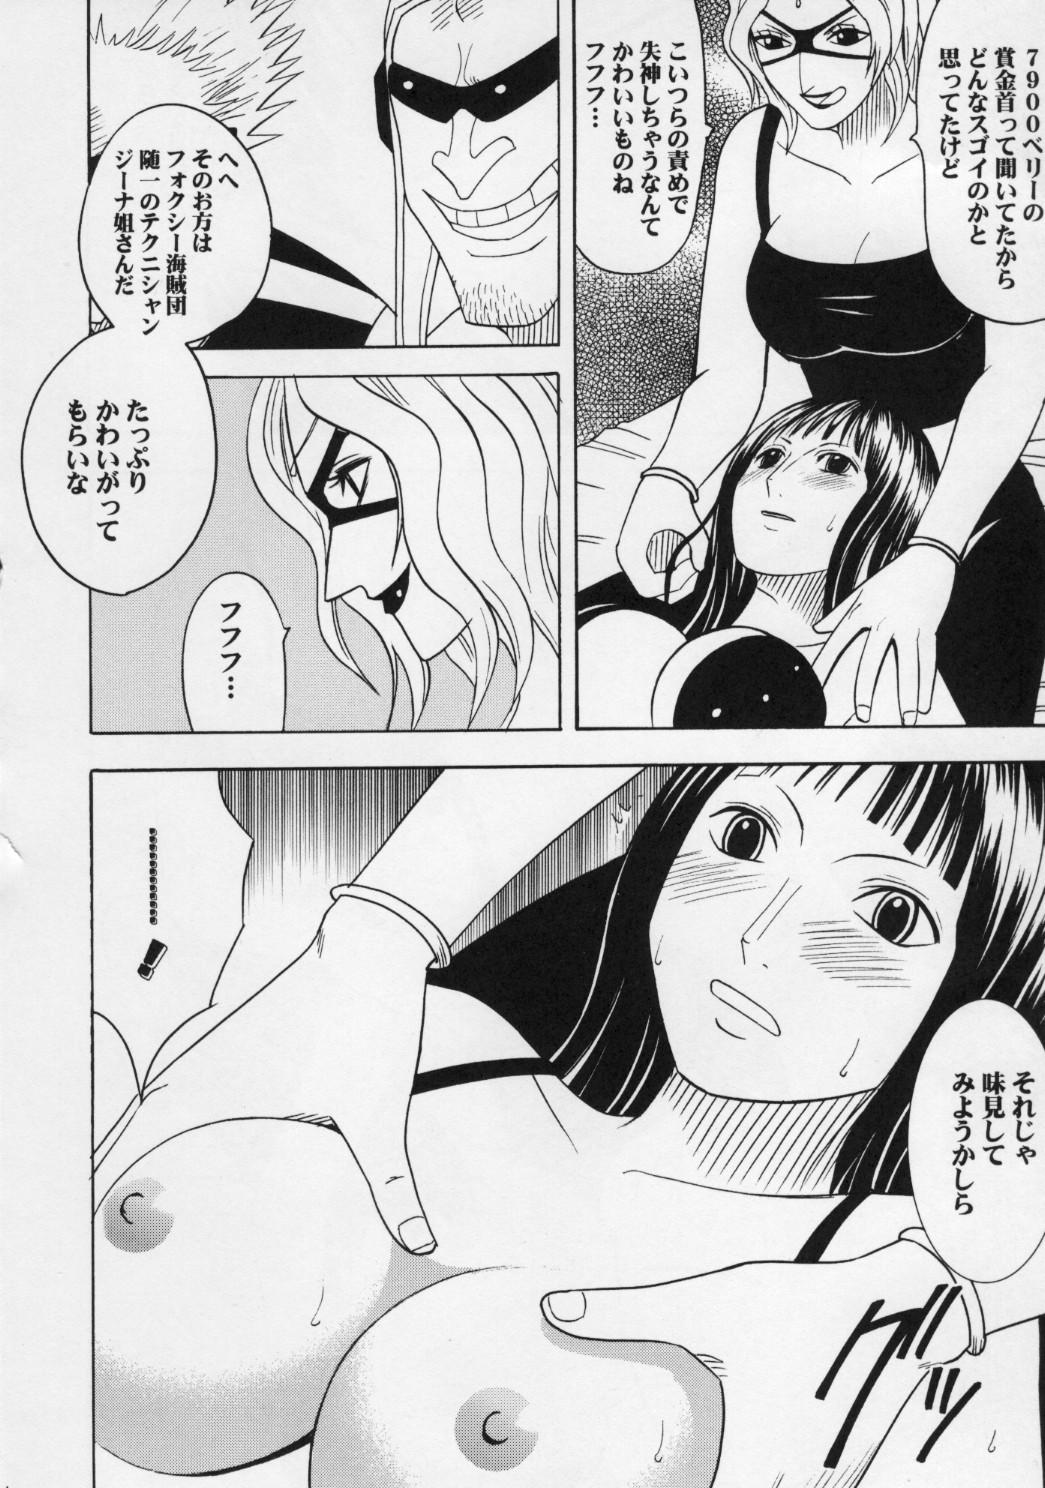 Girl Gets Fucked Robin Hard 2 - One piece Spanish - Page 5